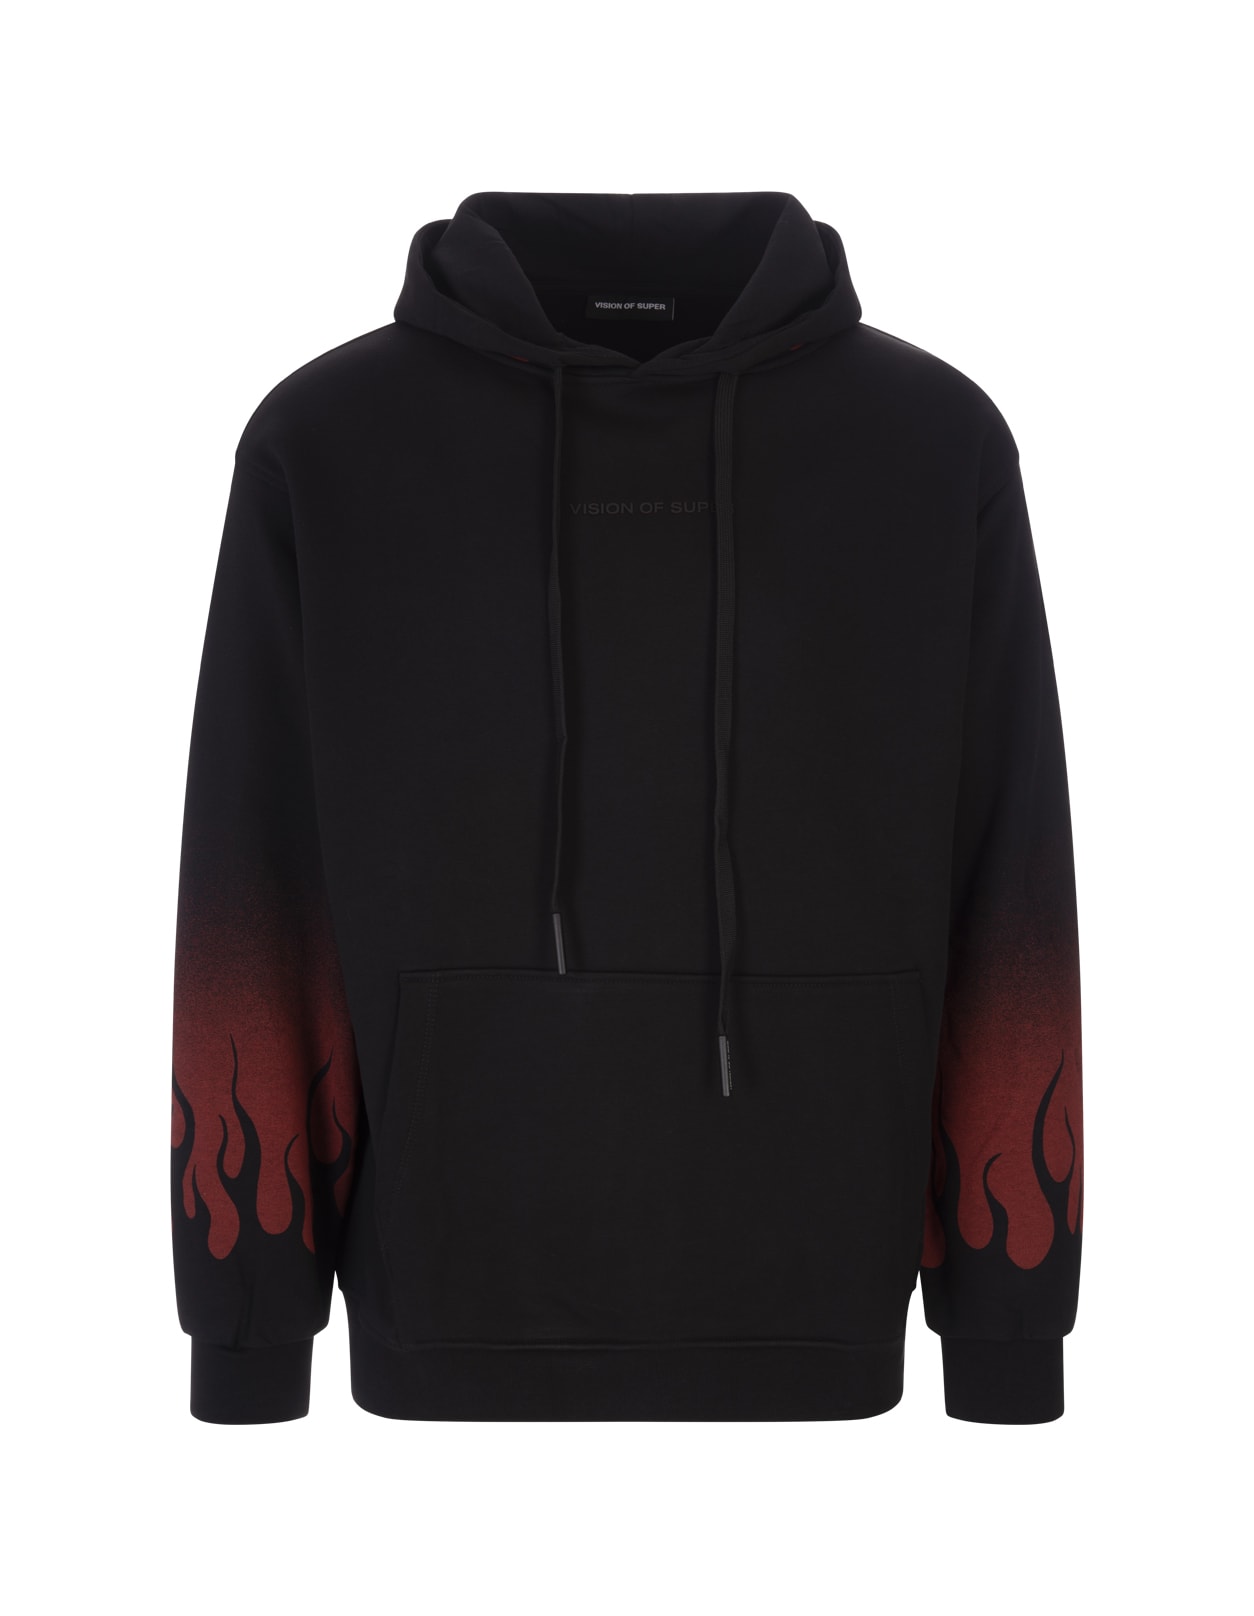 Vision of Super Man Black Hoodie With Negative Red Flames